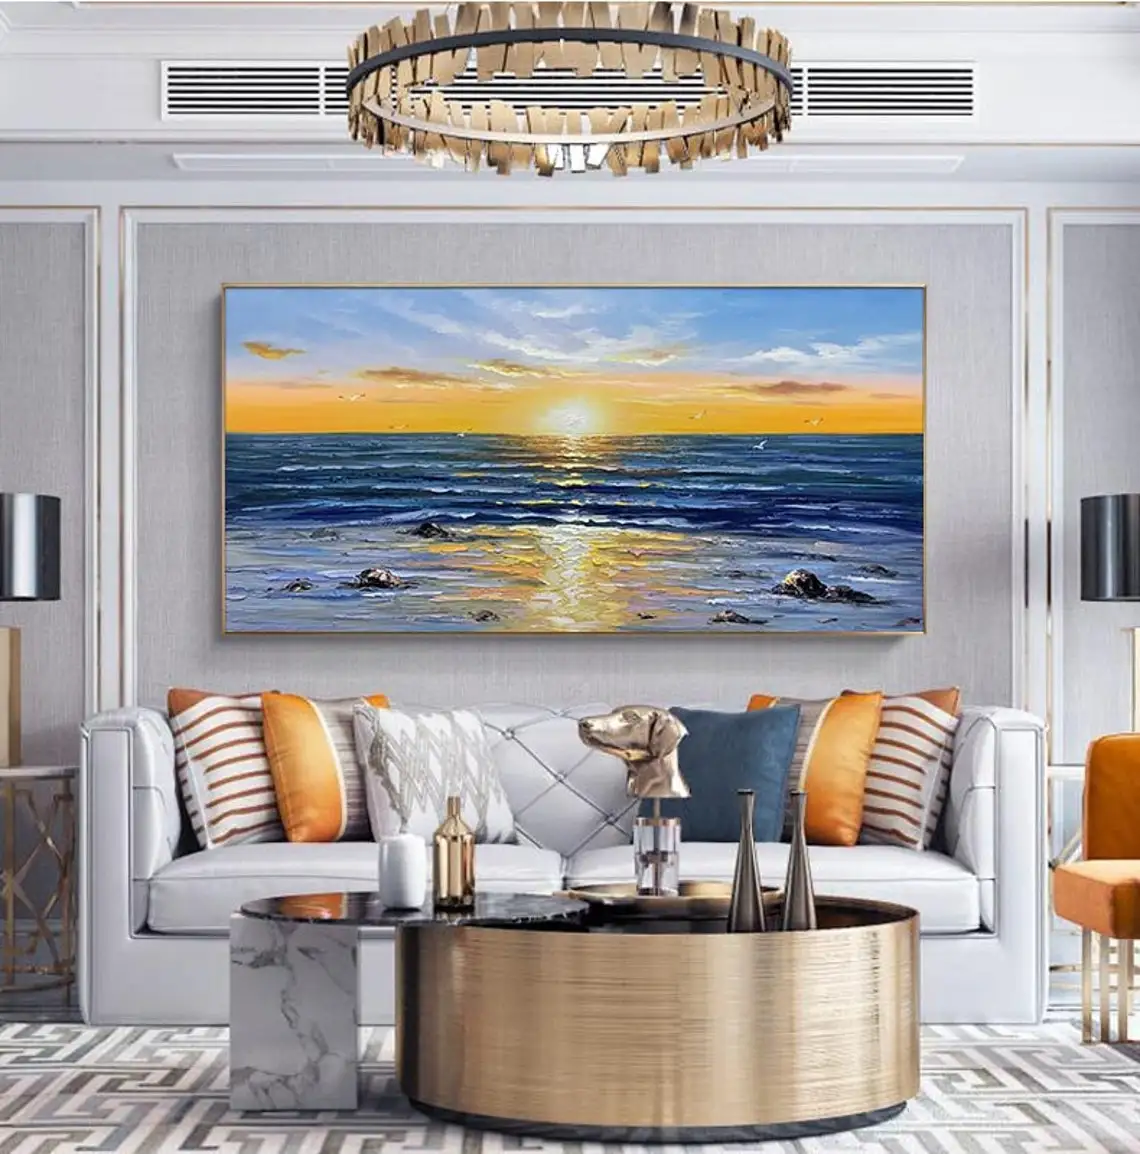 

Seascape Oil Painting Handmade Sunrise Landscape Seascape Large Oil Painting On Canvas Beautiful Scenery Pictures Wall Art Decor